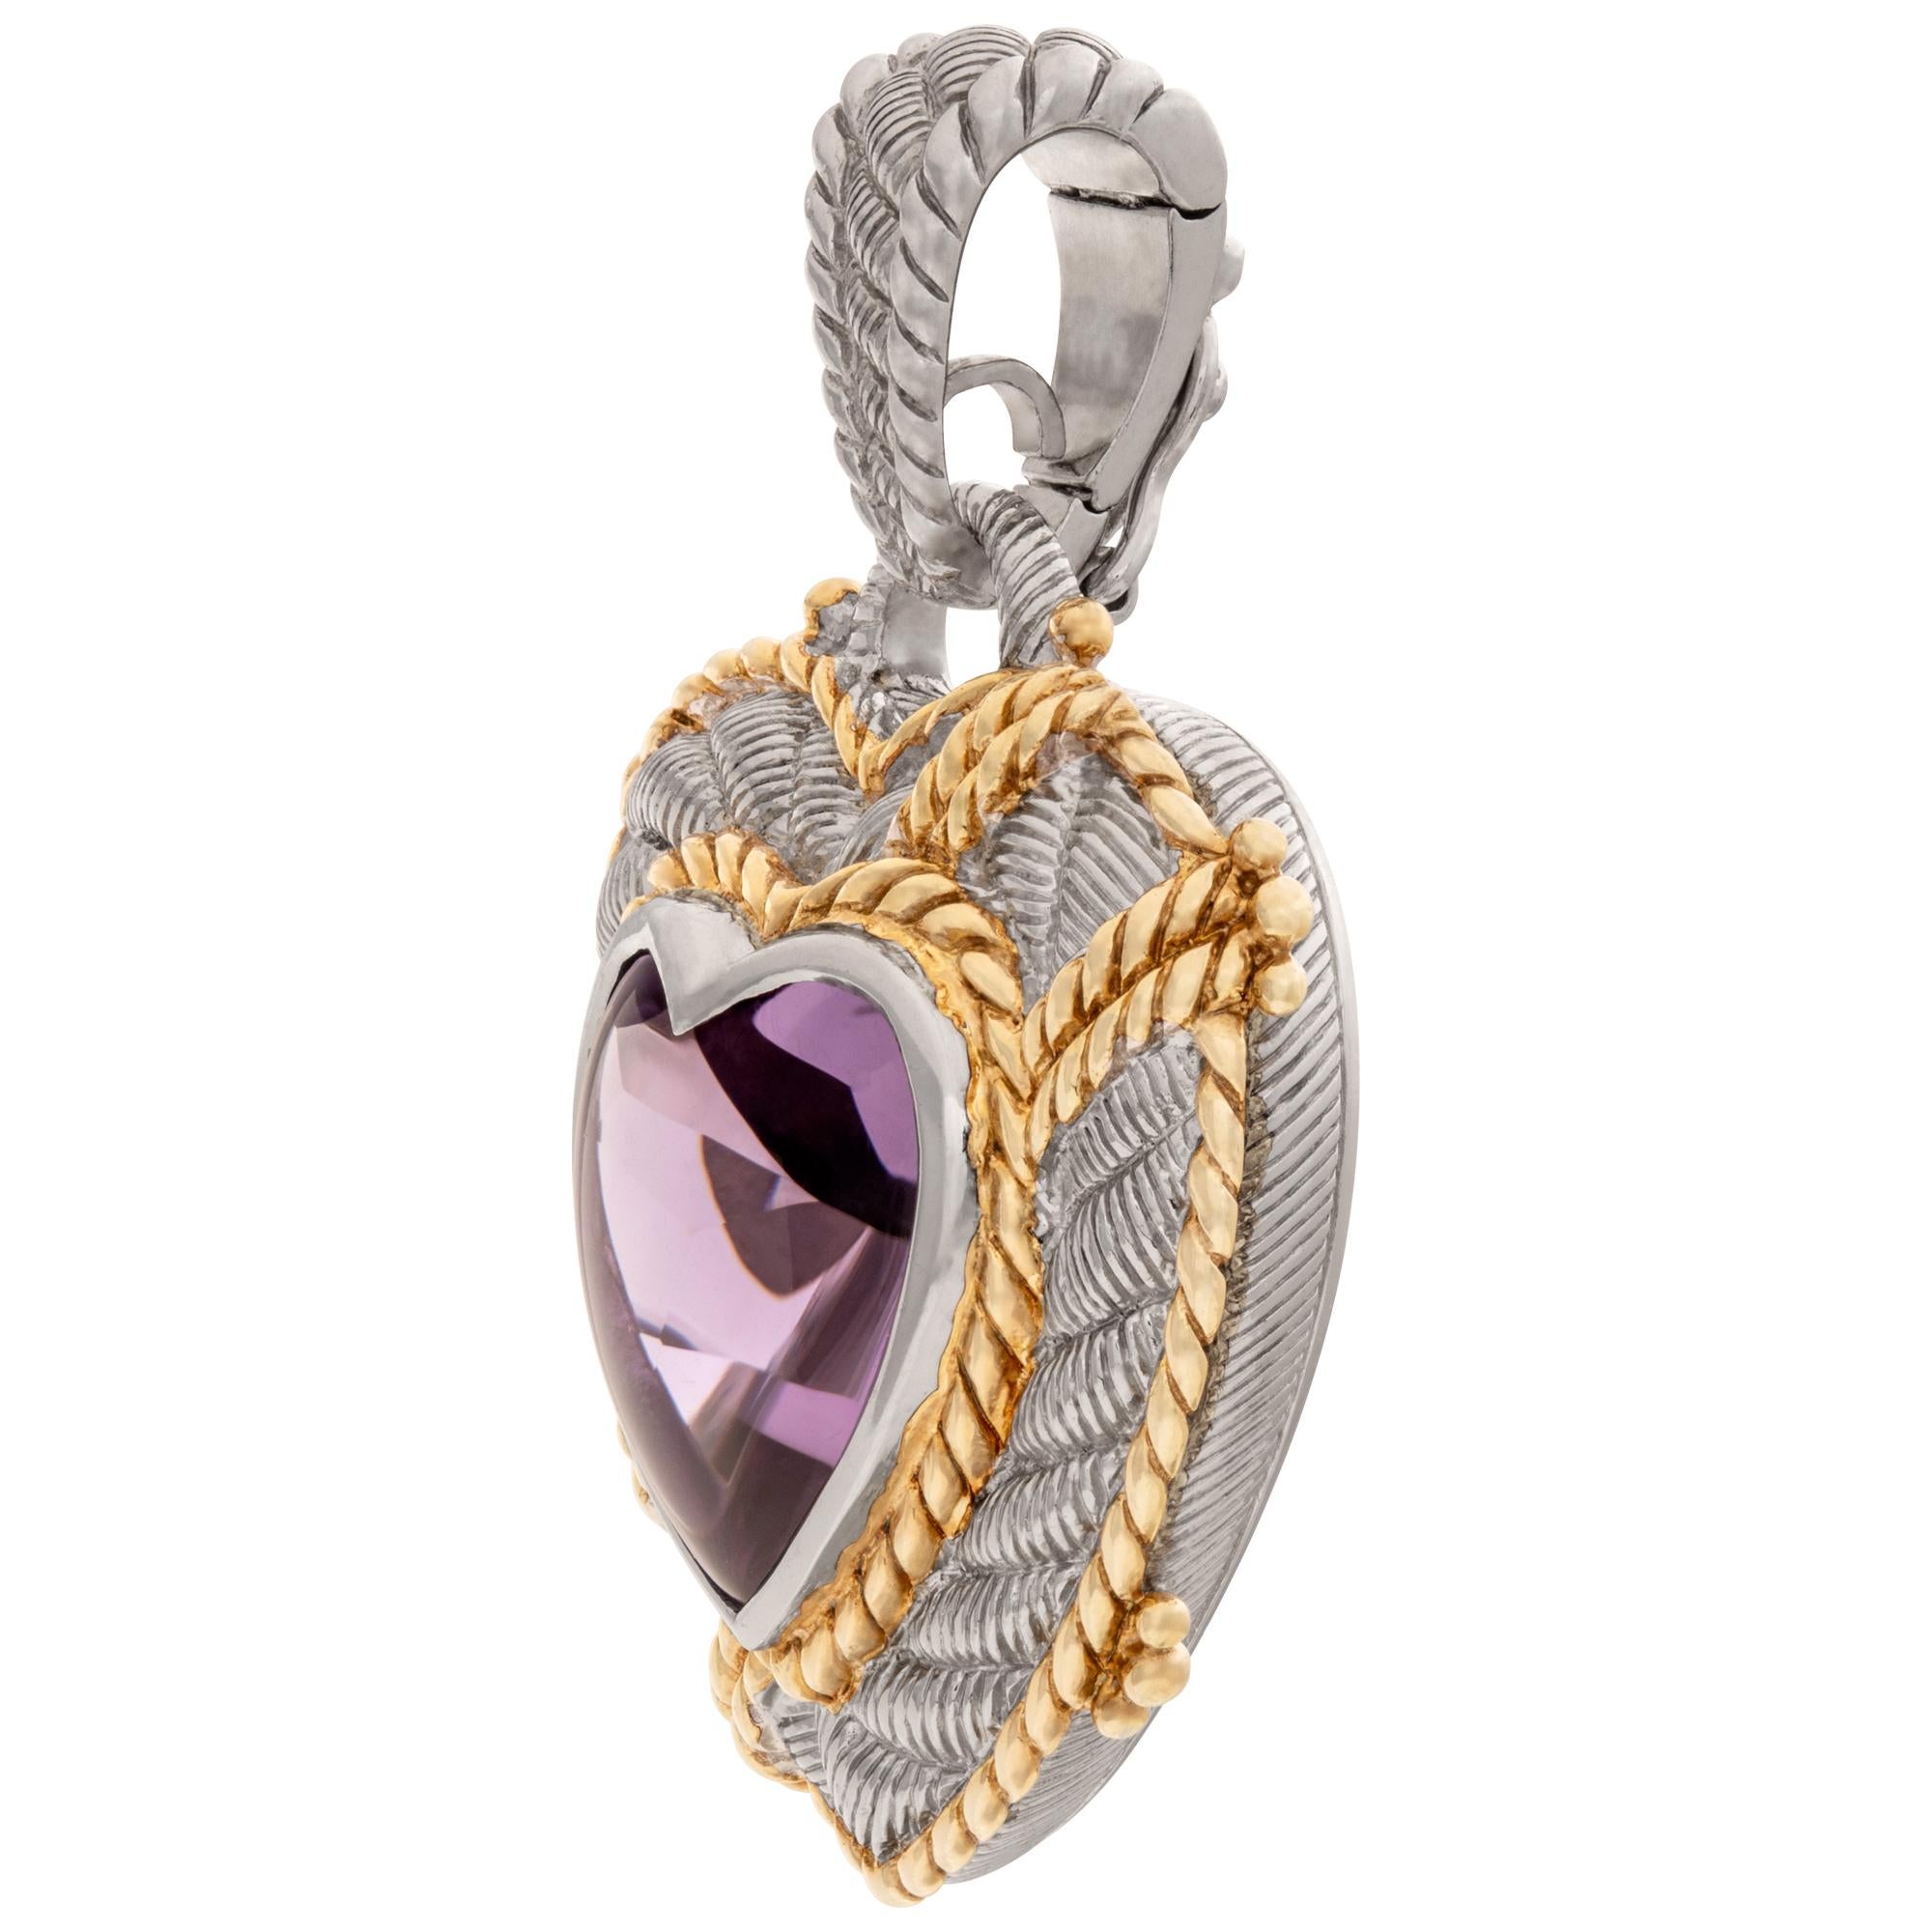 Judith Ripka pendant with heart amethyst two tone in sterling silver. Hanging length 41mm x 30 mm.
